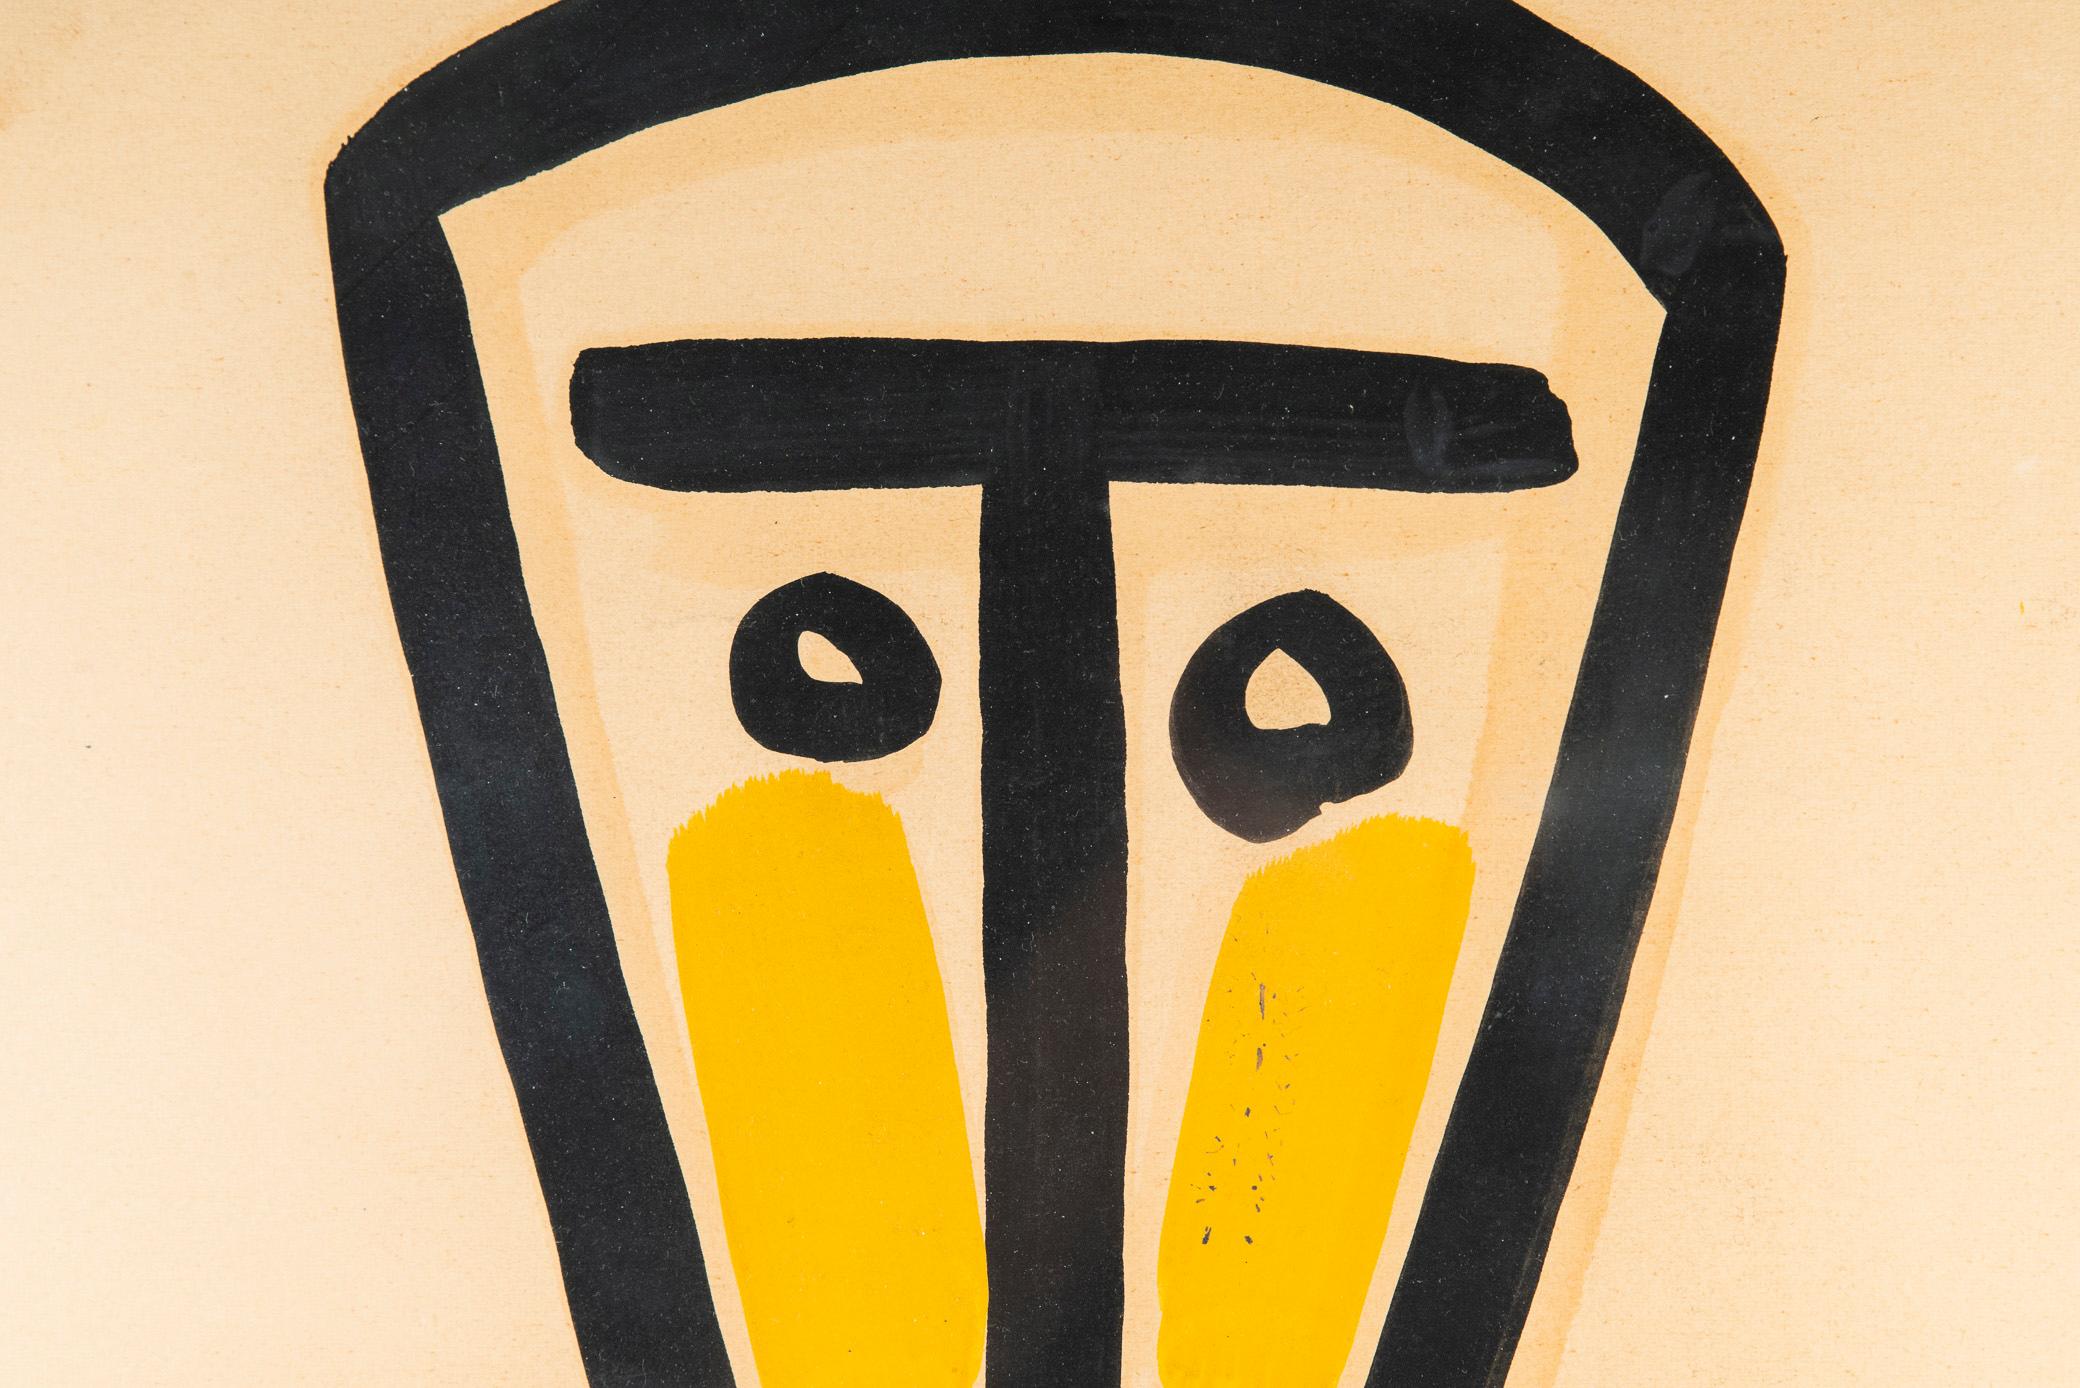 Albert Chubac, 
Double-sided painting, mixed-media on paper,
Signed, 
circa 1965, France. 

Measures: Height 99 cm, width 43 cm, depth 3 cm.

Bibliography:
- Albert Chubac, MAMAC Nice, Cultures Nice Editions, 2004.
- Albert Chubac: exhibition, Nice,